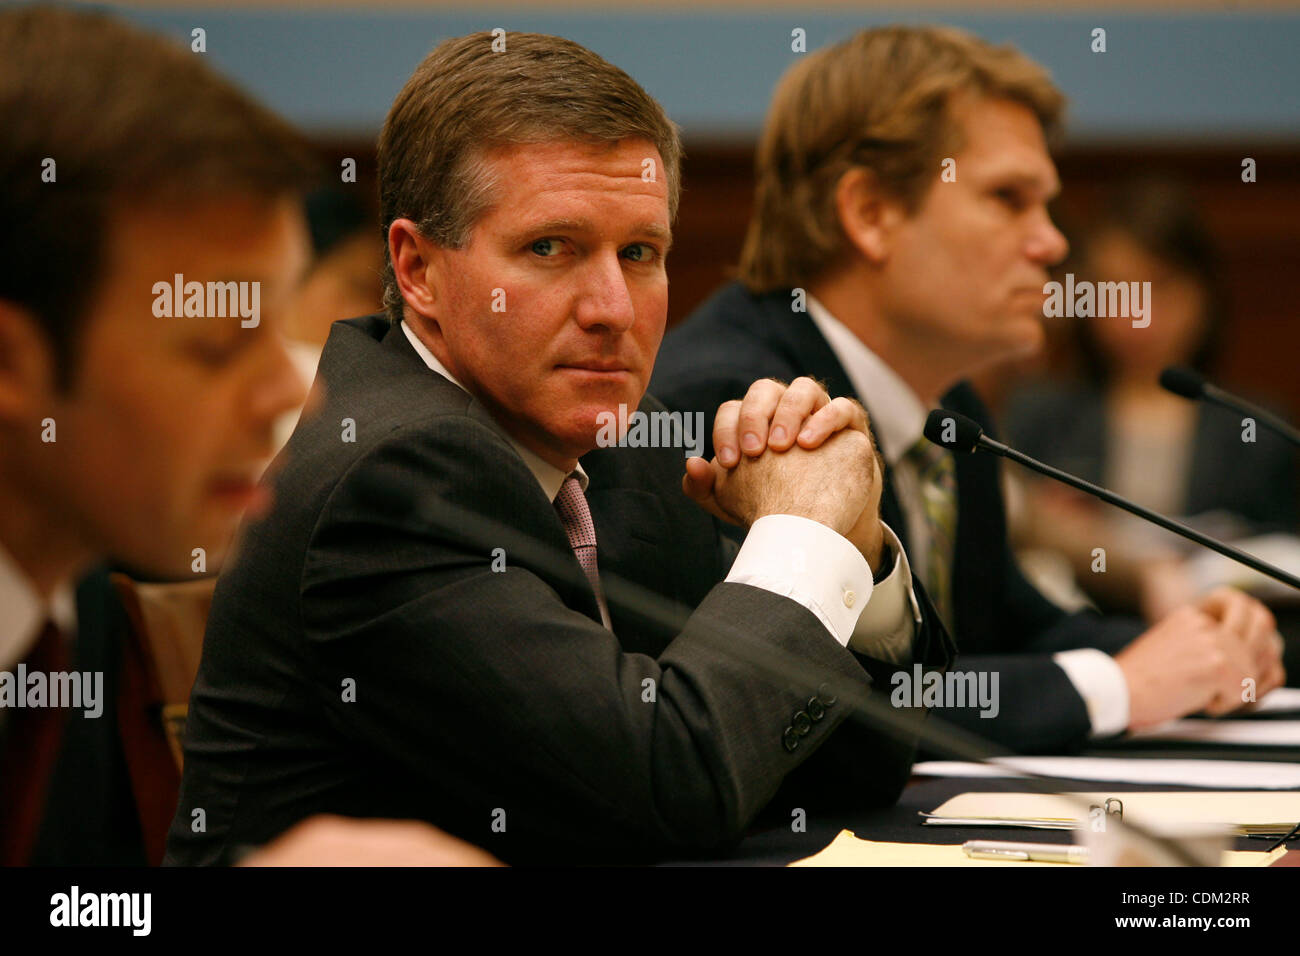 Mar. 30, 2011 - Washington, D.C, U.S. - Kenneth Wainstein, partner at O'Melveny & Myers, LLP testifies before the Crime, Terrorism and Homeland Security Subcommittee hearing on ''The Permanent Provisions of the PATRIOT Act. (Credit Image: © James Berglie/ZUMAPRESS.com) Stock Photo